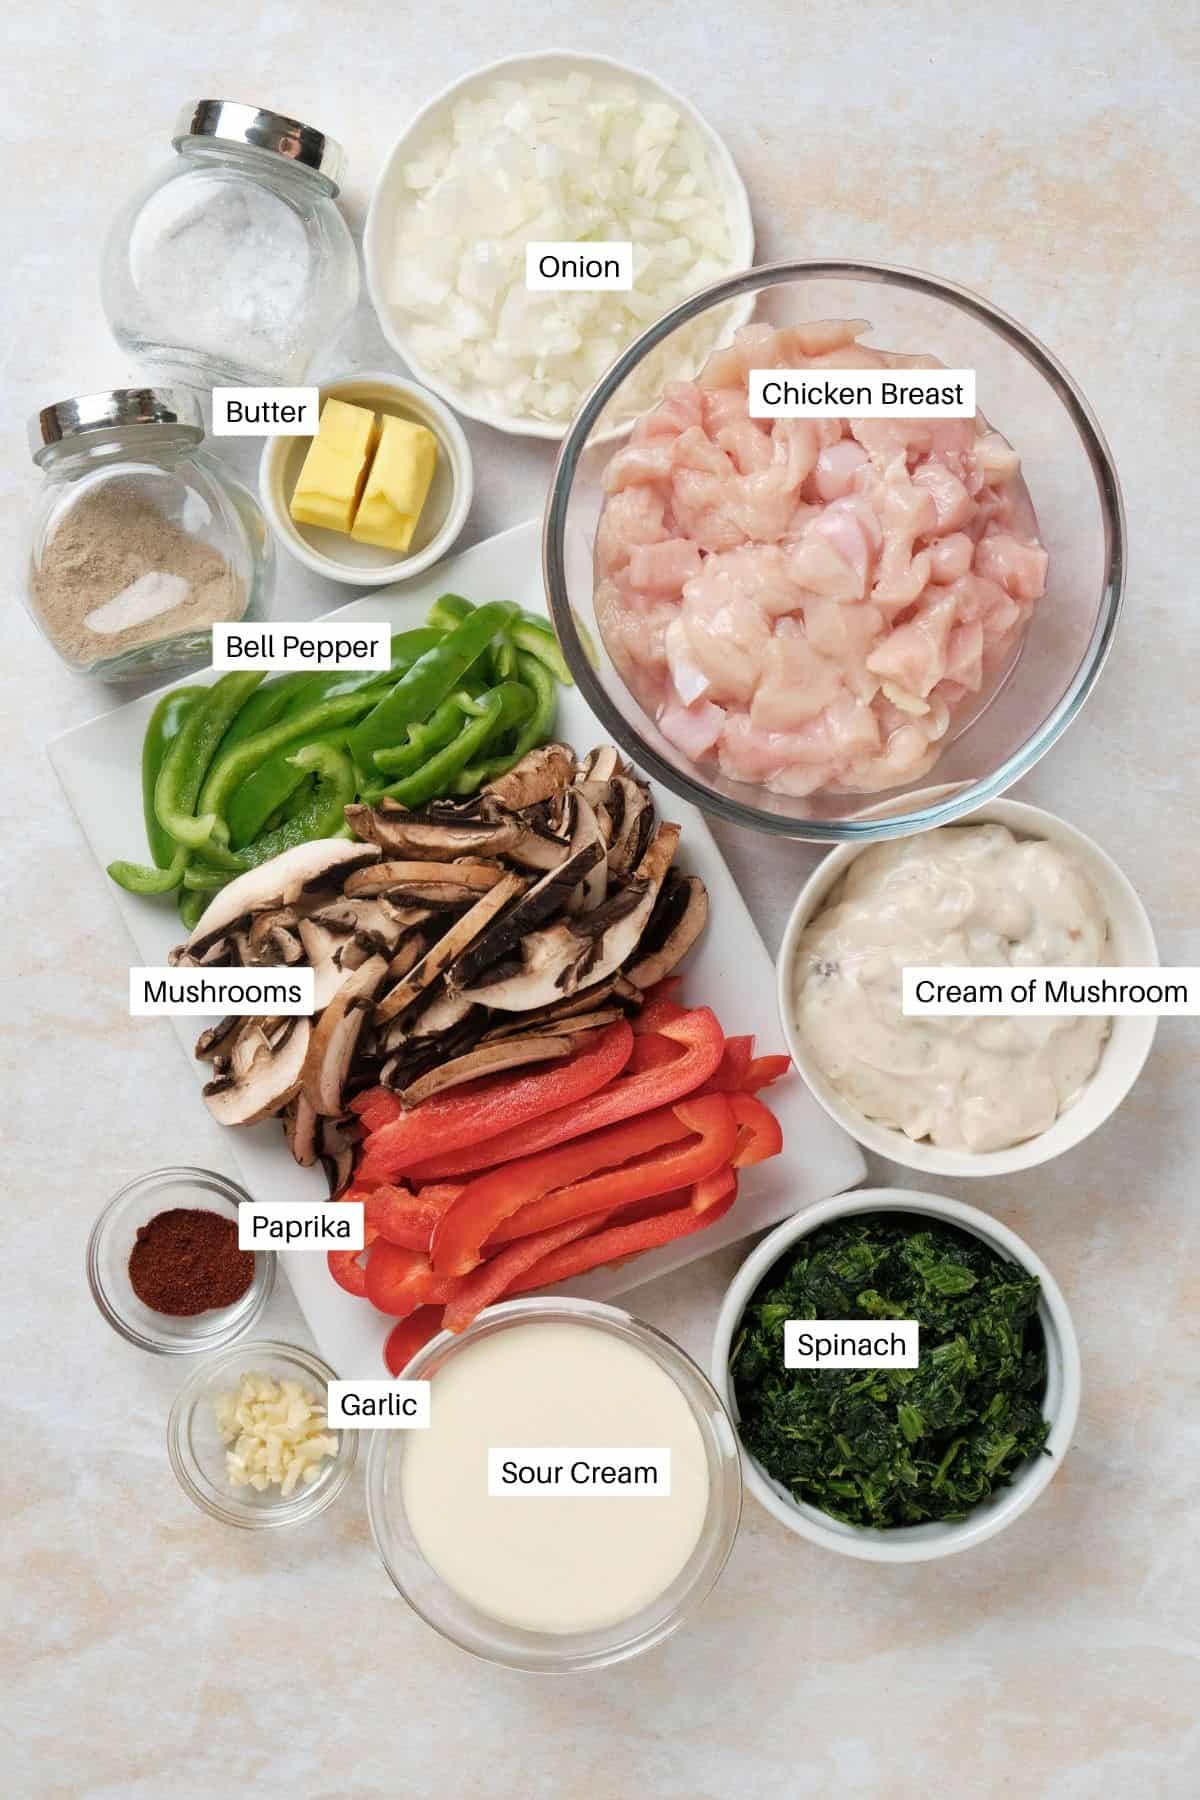 Casserole ingredients including mushrooms, peppers, and sour cream.